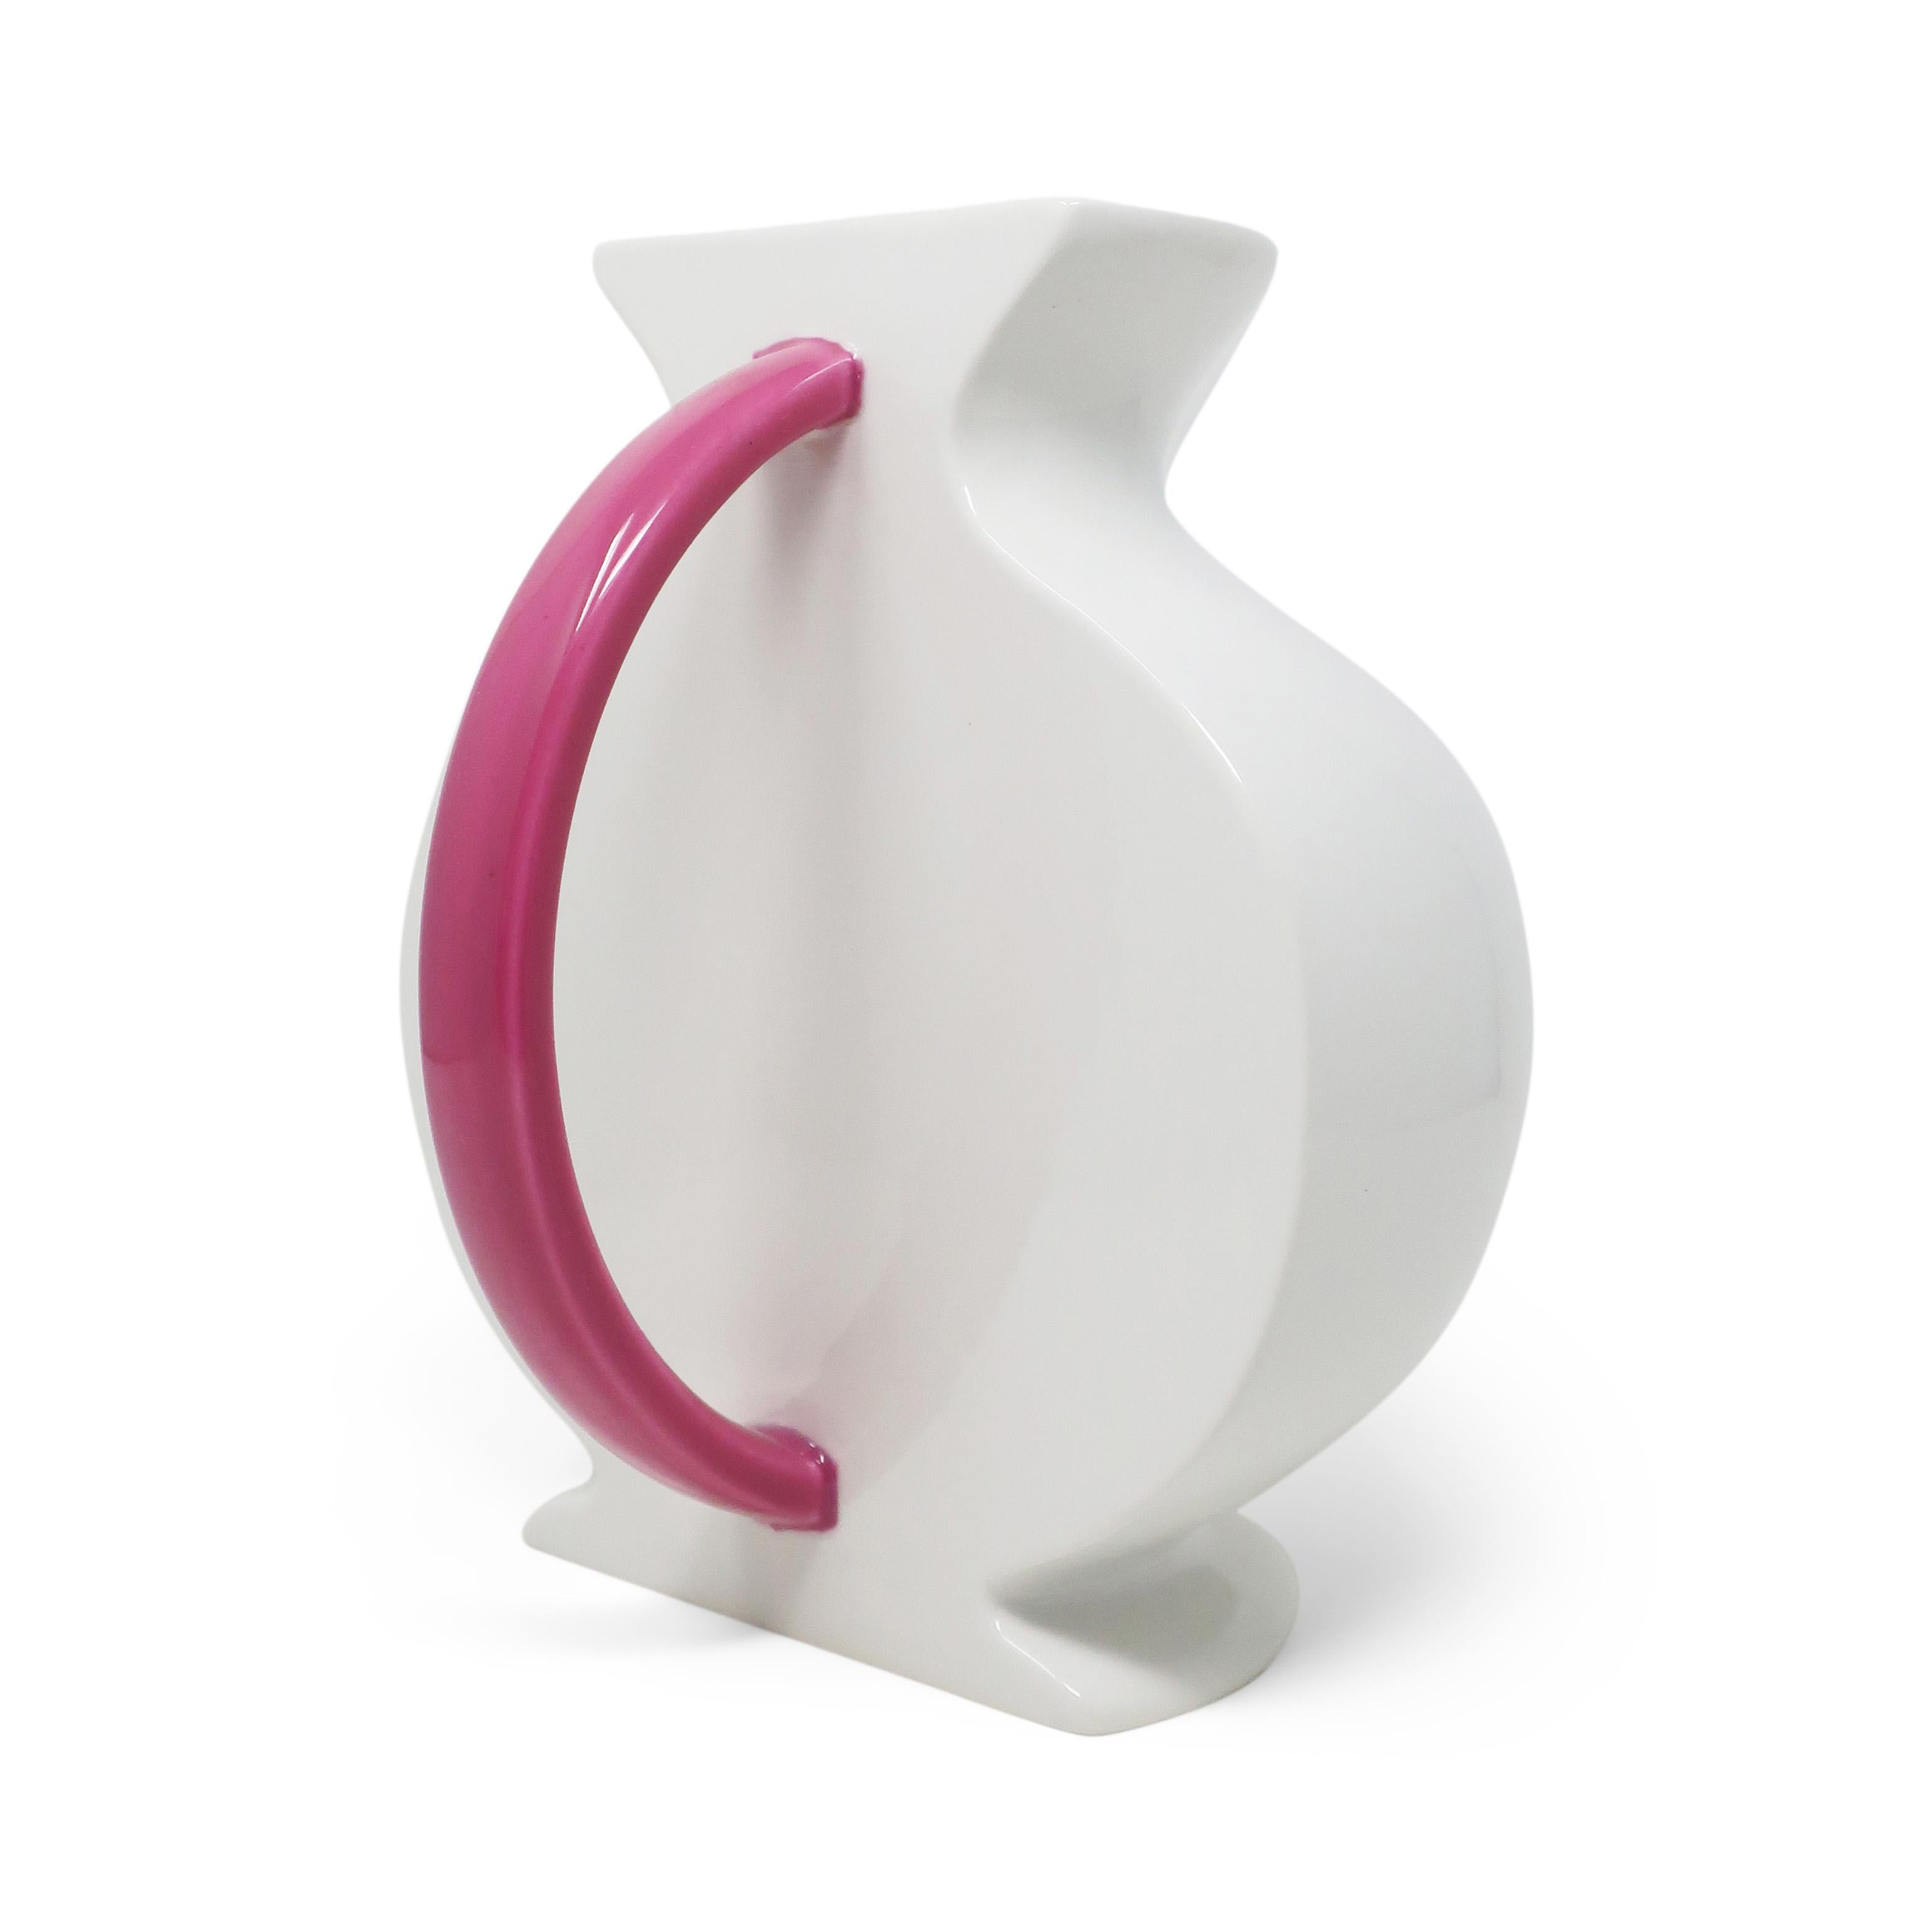 Stunning postmodern ceramic pitcher from the Hollywood collection designed by Marco Zanini for Flavia Montelupo/Bitossi. The white body, rounded pink handle, and flat back show a clear influence from the Memphis group designers, of which Zanini was